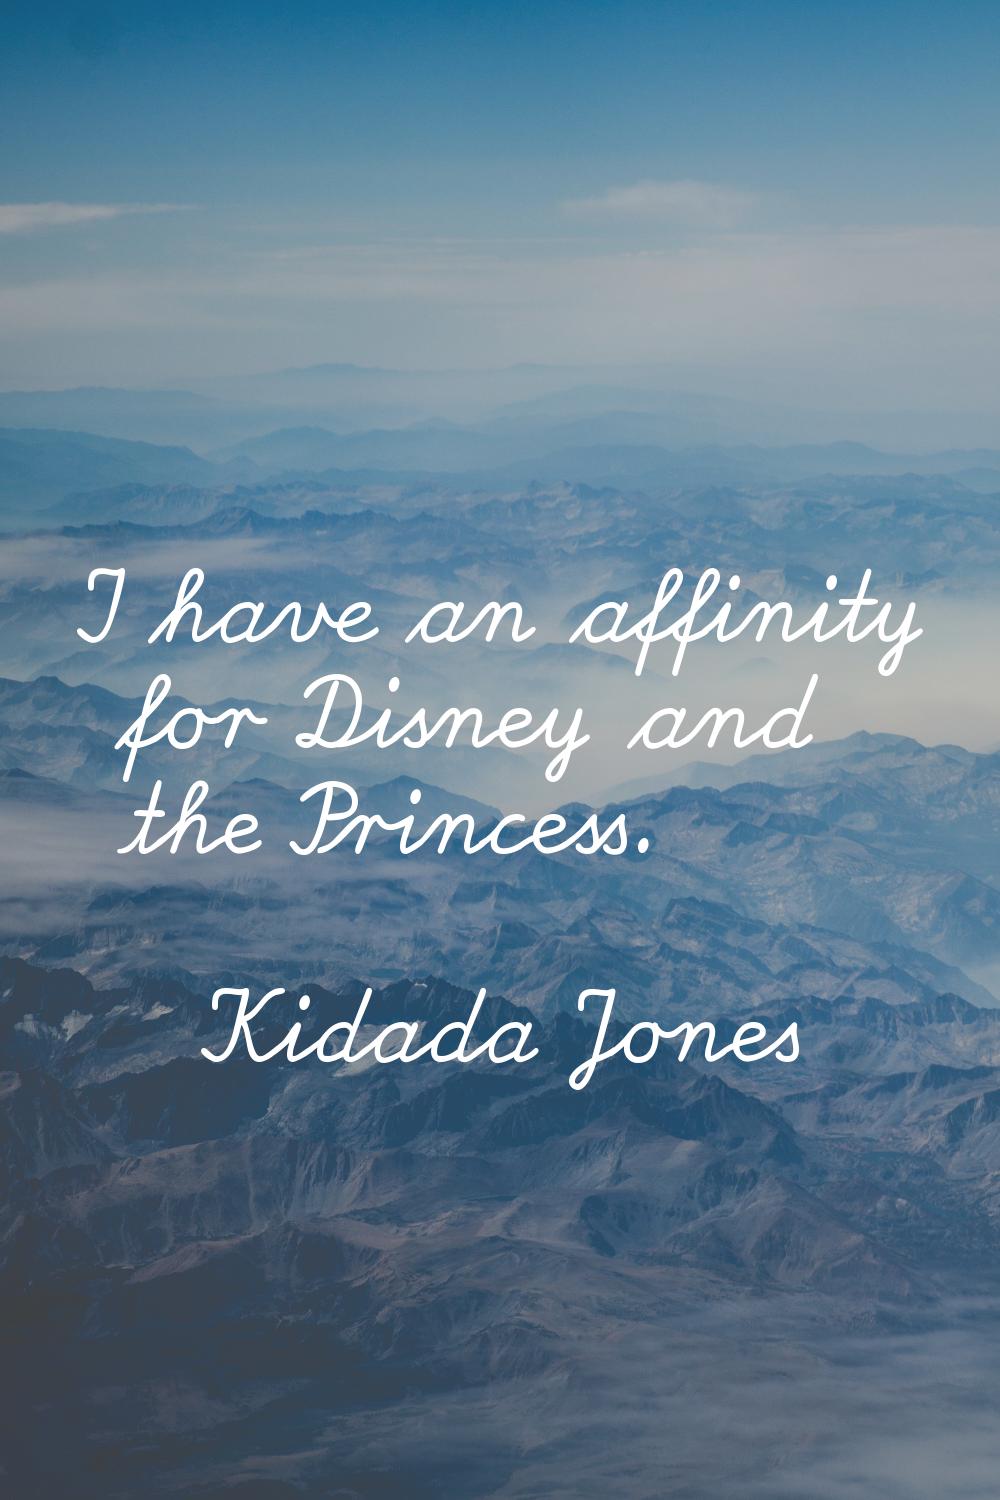 I have an affinity for Disney and the Princess.